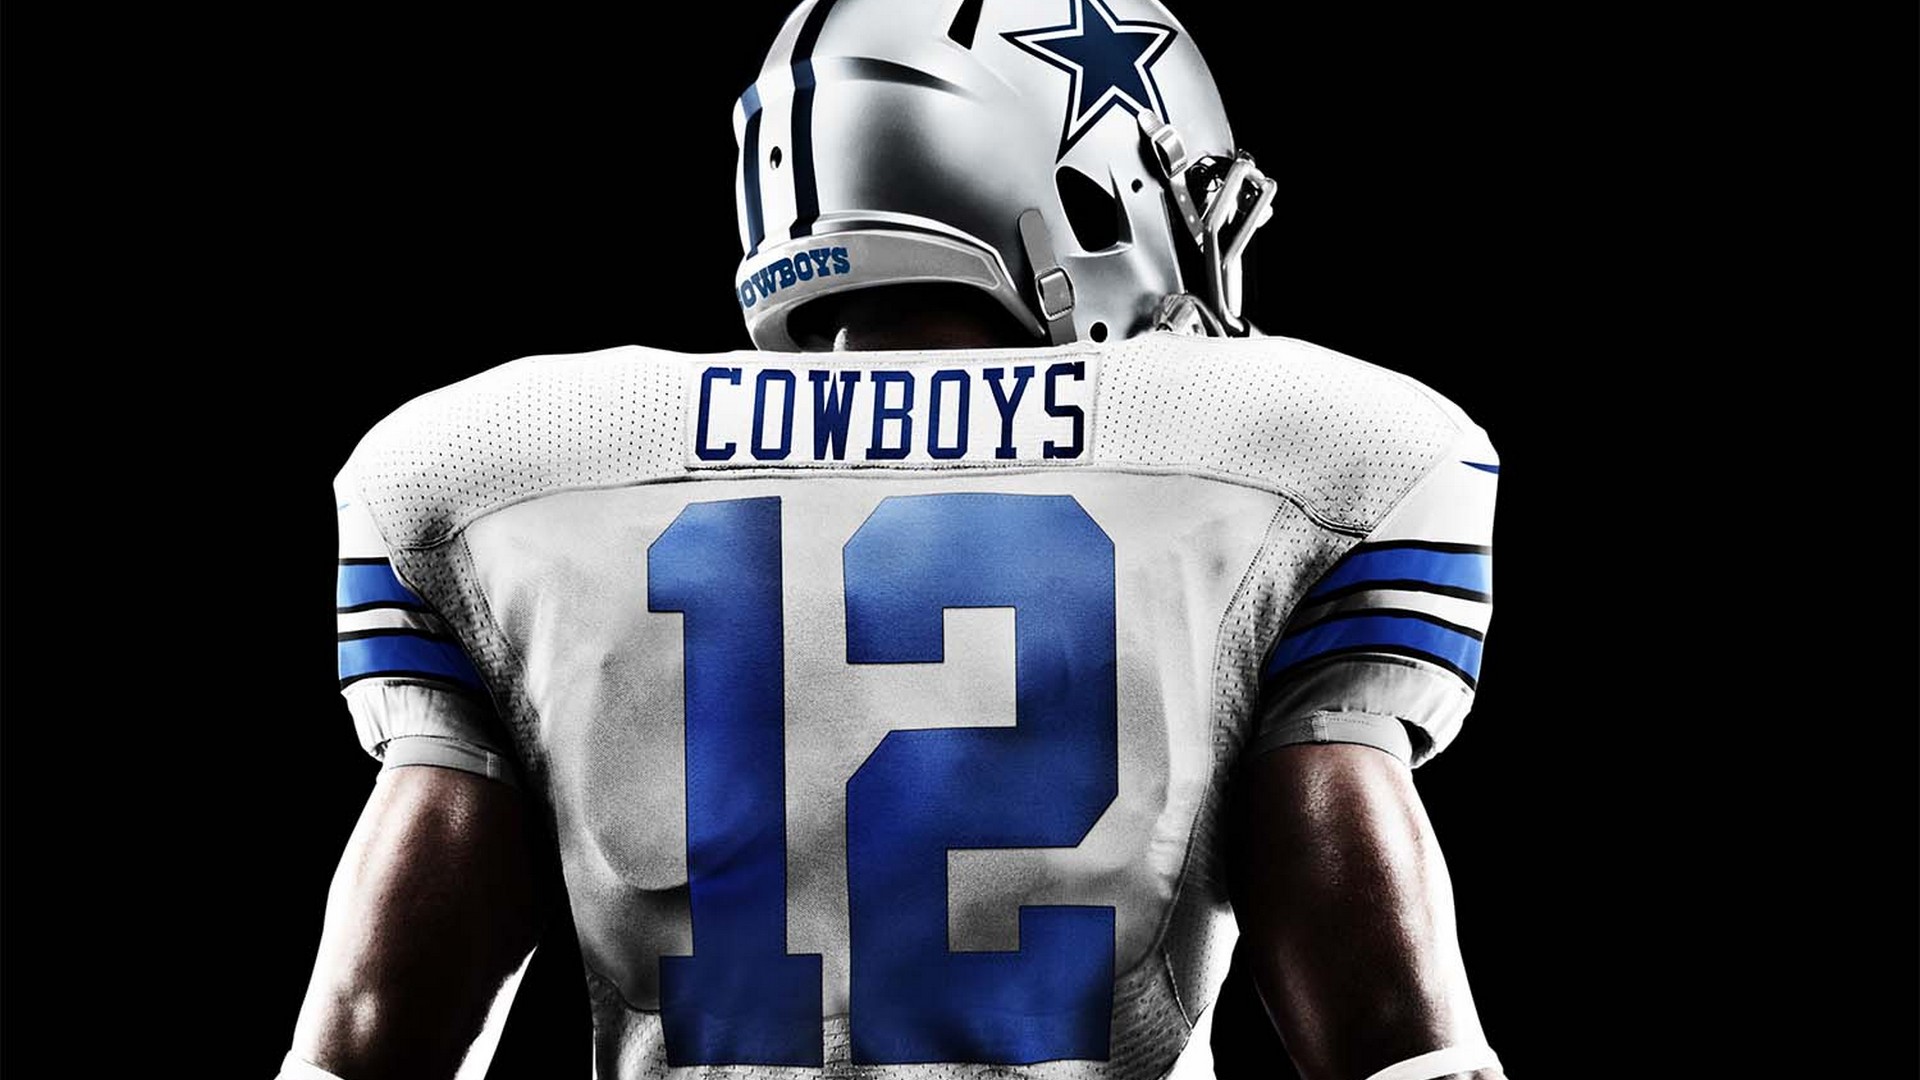 Dallas Cowboys Wallpaper for Computer with high-resolution 1920x1080 pixel. Download and set as wallpaper for Desktop Computer, Apple iPhone X, XS Max, XR, 8, 7, 6, SE, iPad, Android